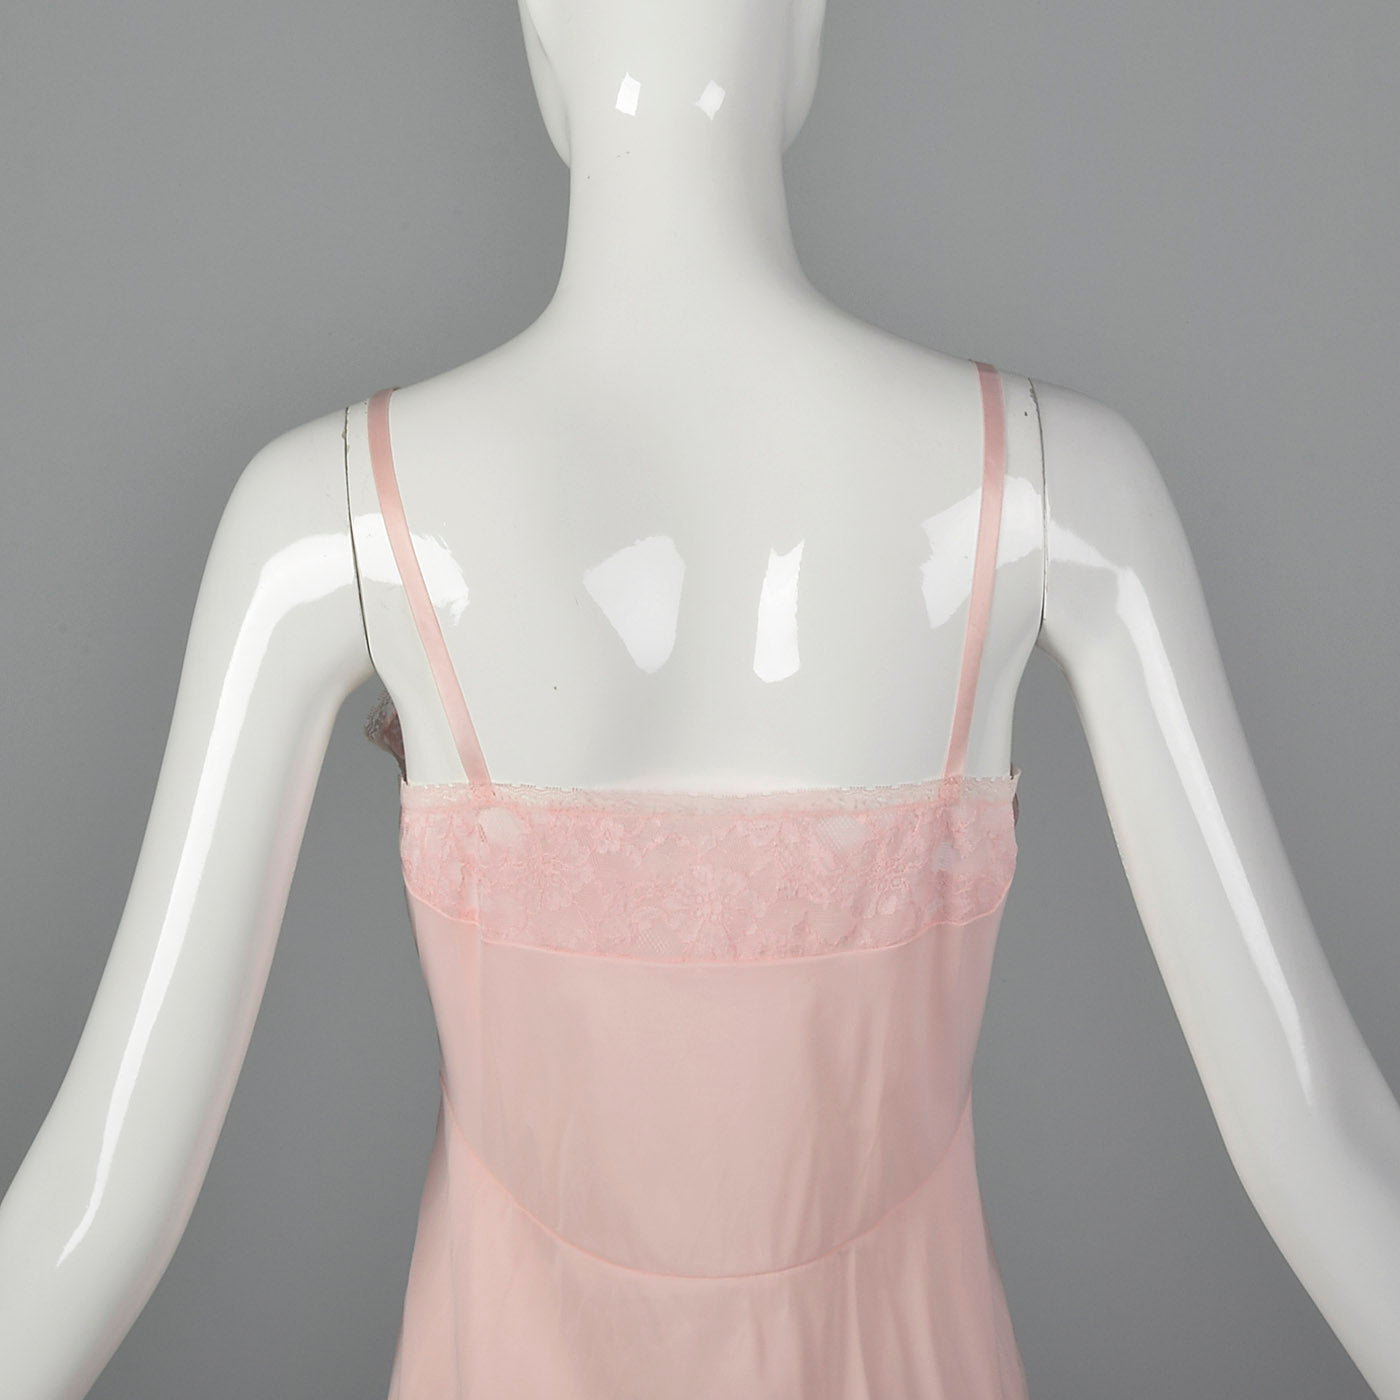 1950s Vanity Fair Pink Slip with Lace Bust